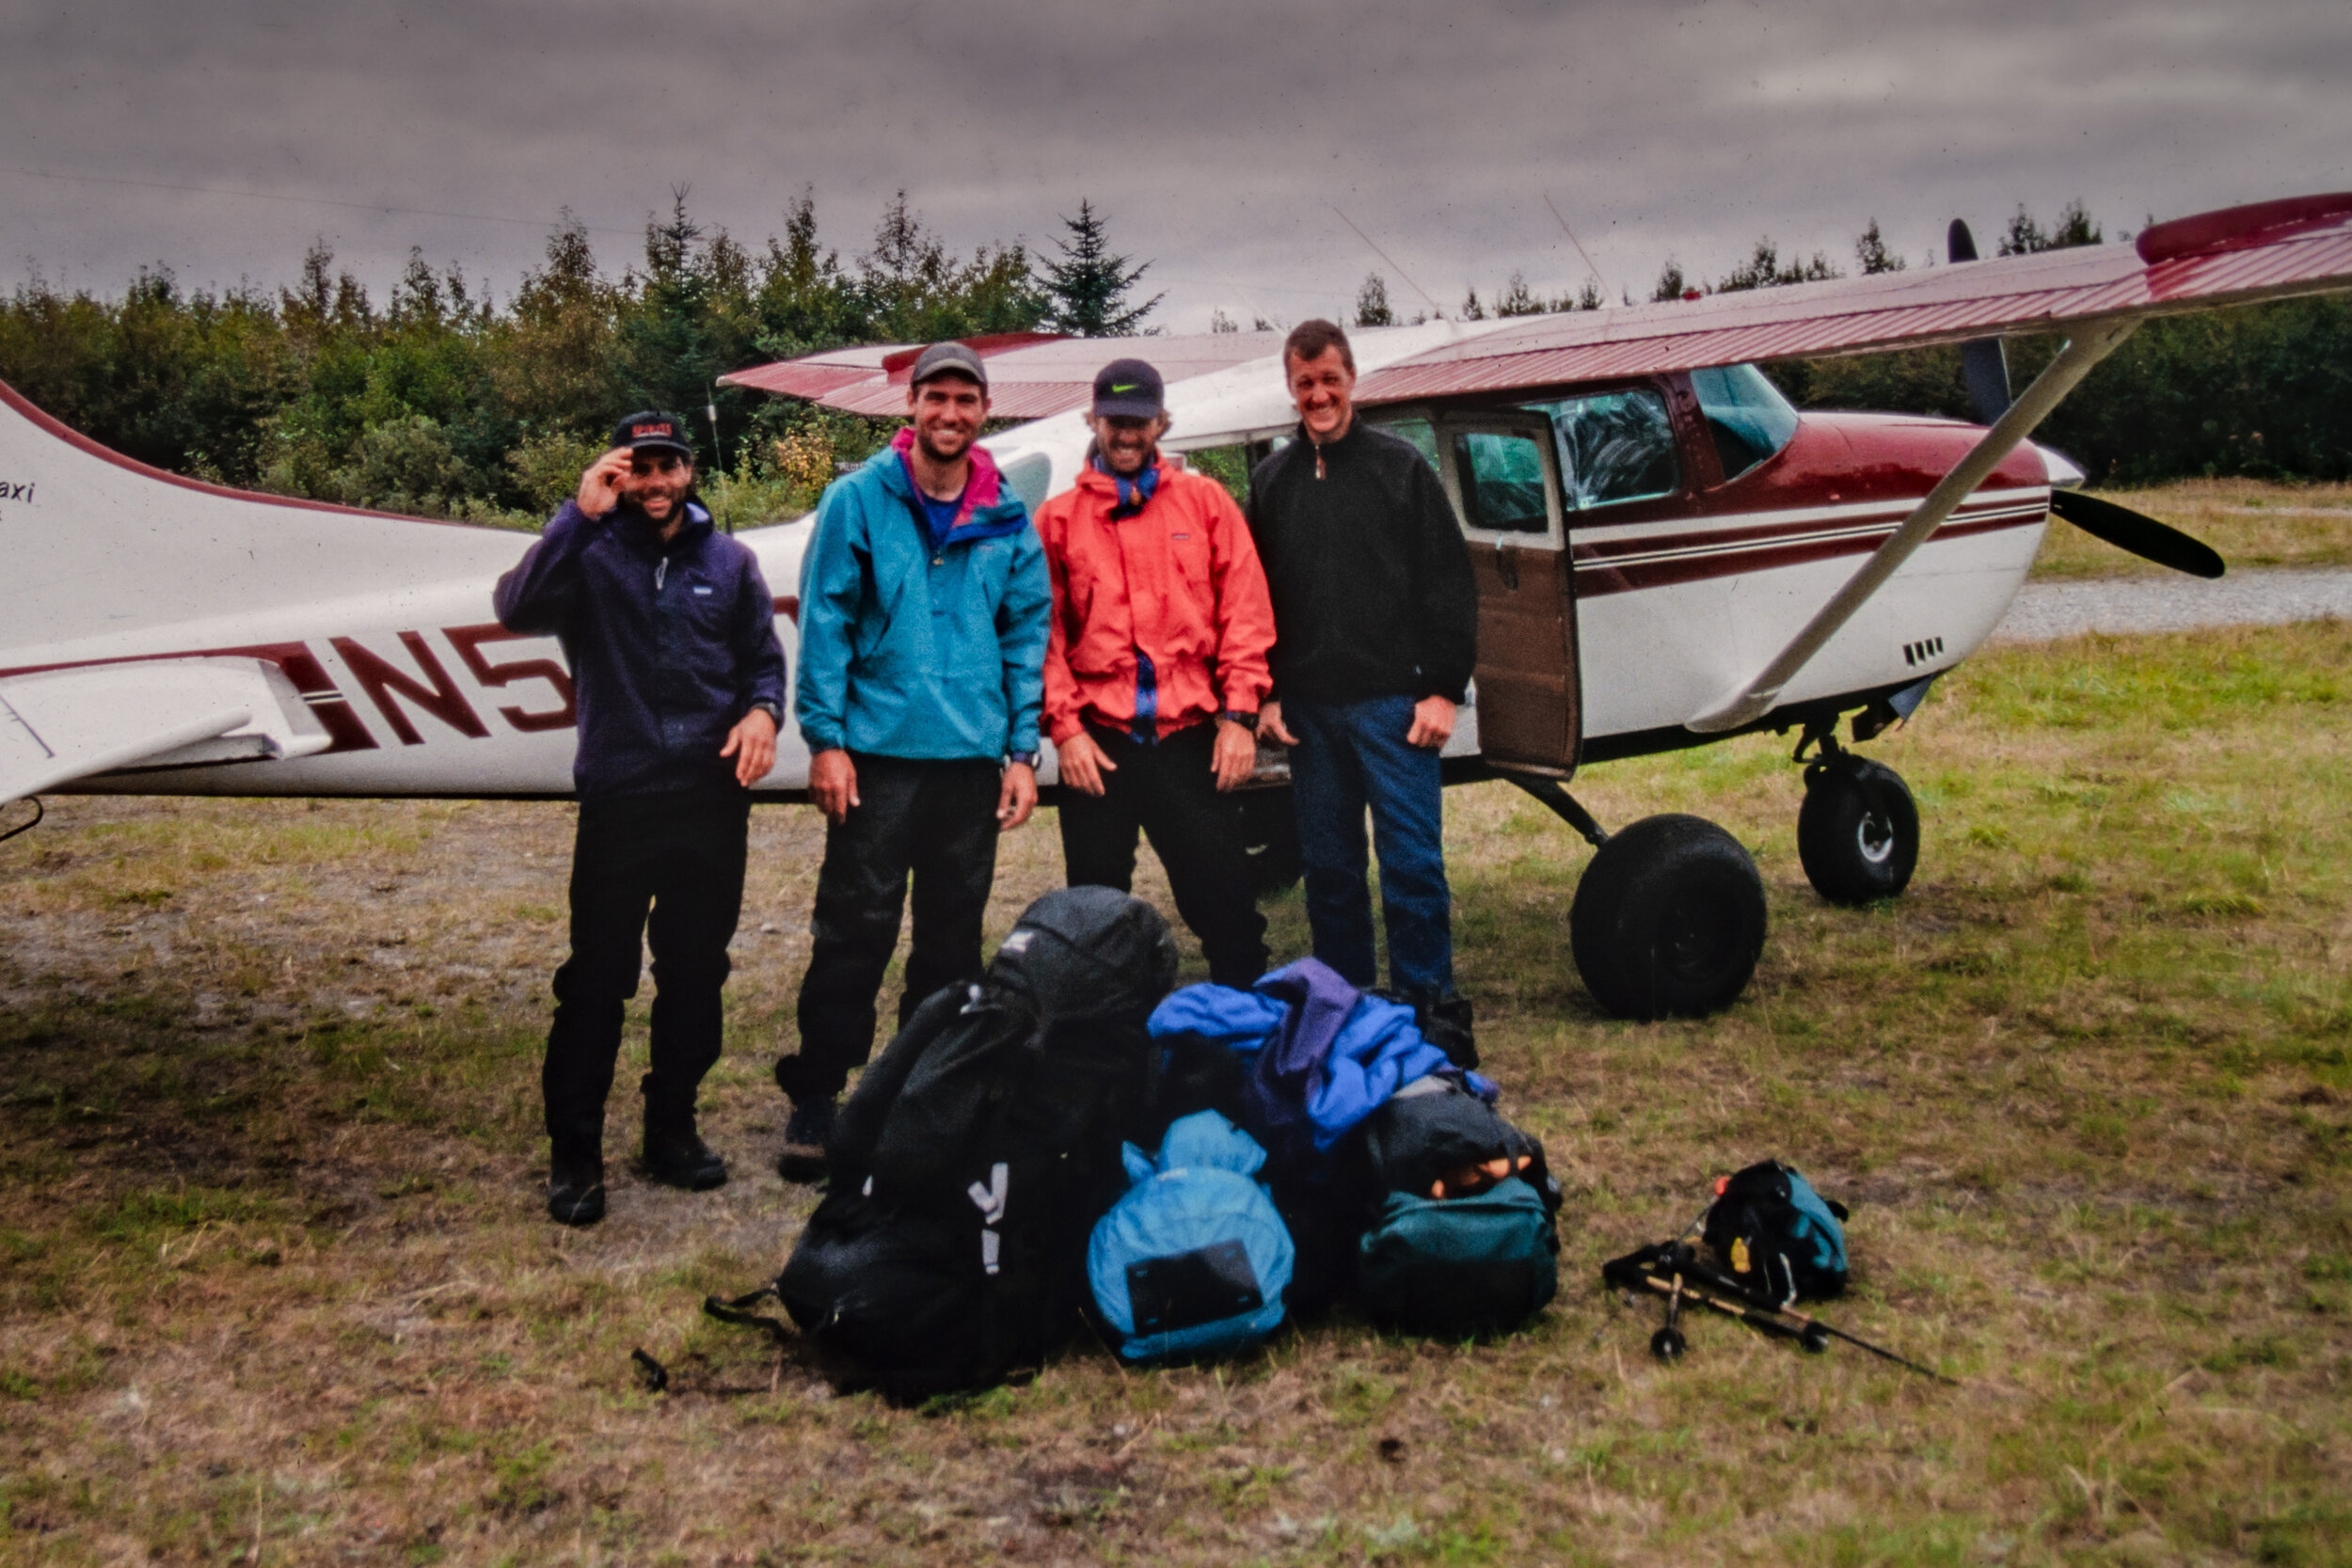  From the left, Viju, myself, Tom and Rupert arrive at the remote airstrip at Dry Bay and board our bush plane that will take us back to Yakutat. The pilot told us that we were the first party in 4 or 5 years that completed the Cape Fairweather trave